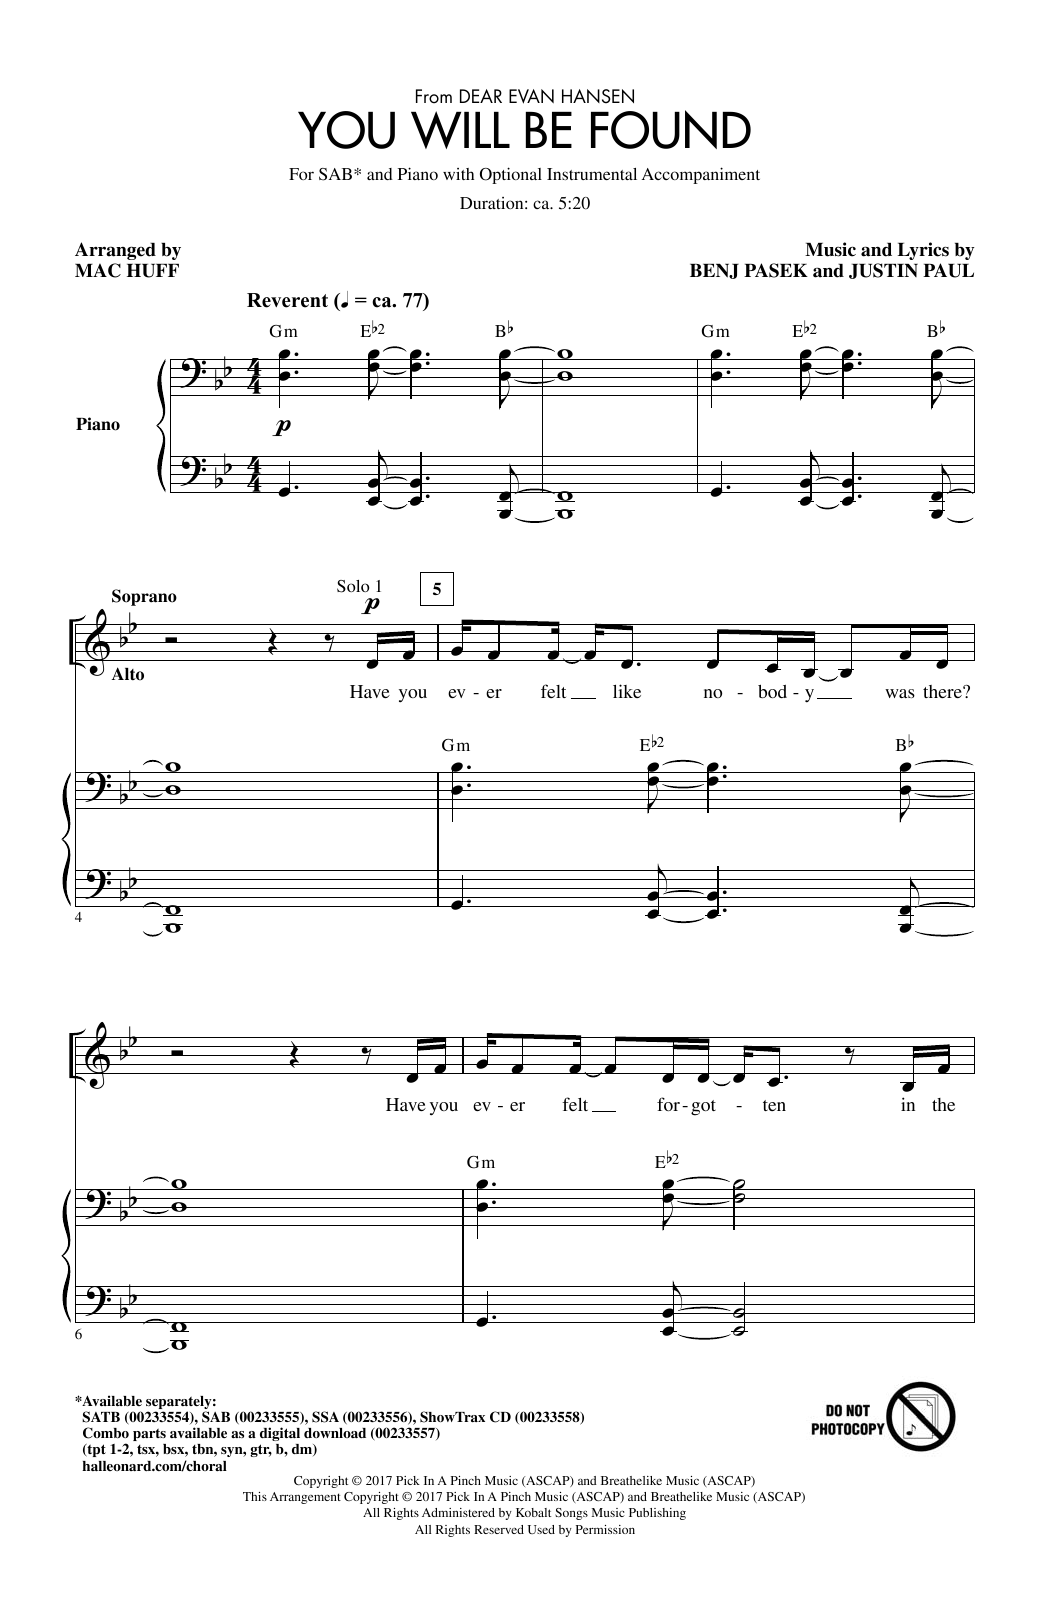 Download Pasek & Paul You Will Be Found (from Dear Evan Hanse Sheet Music